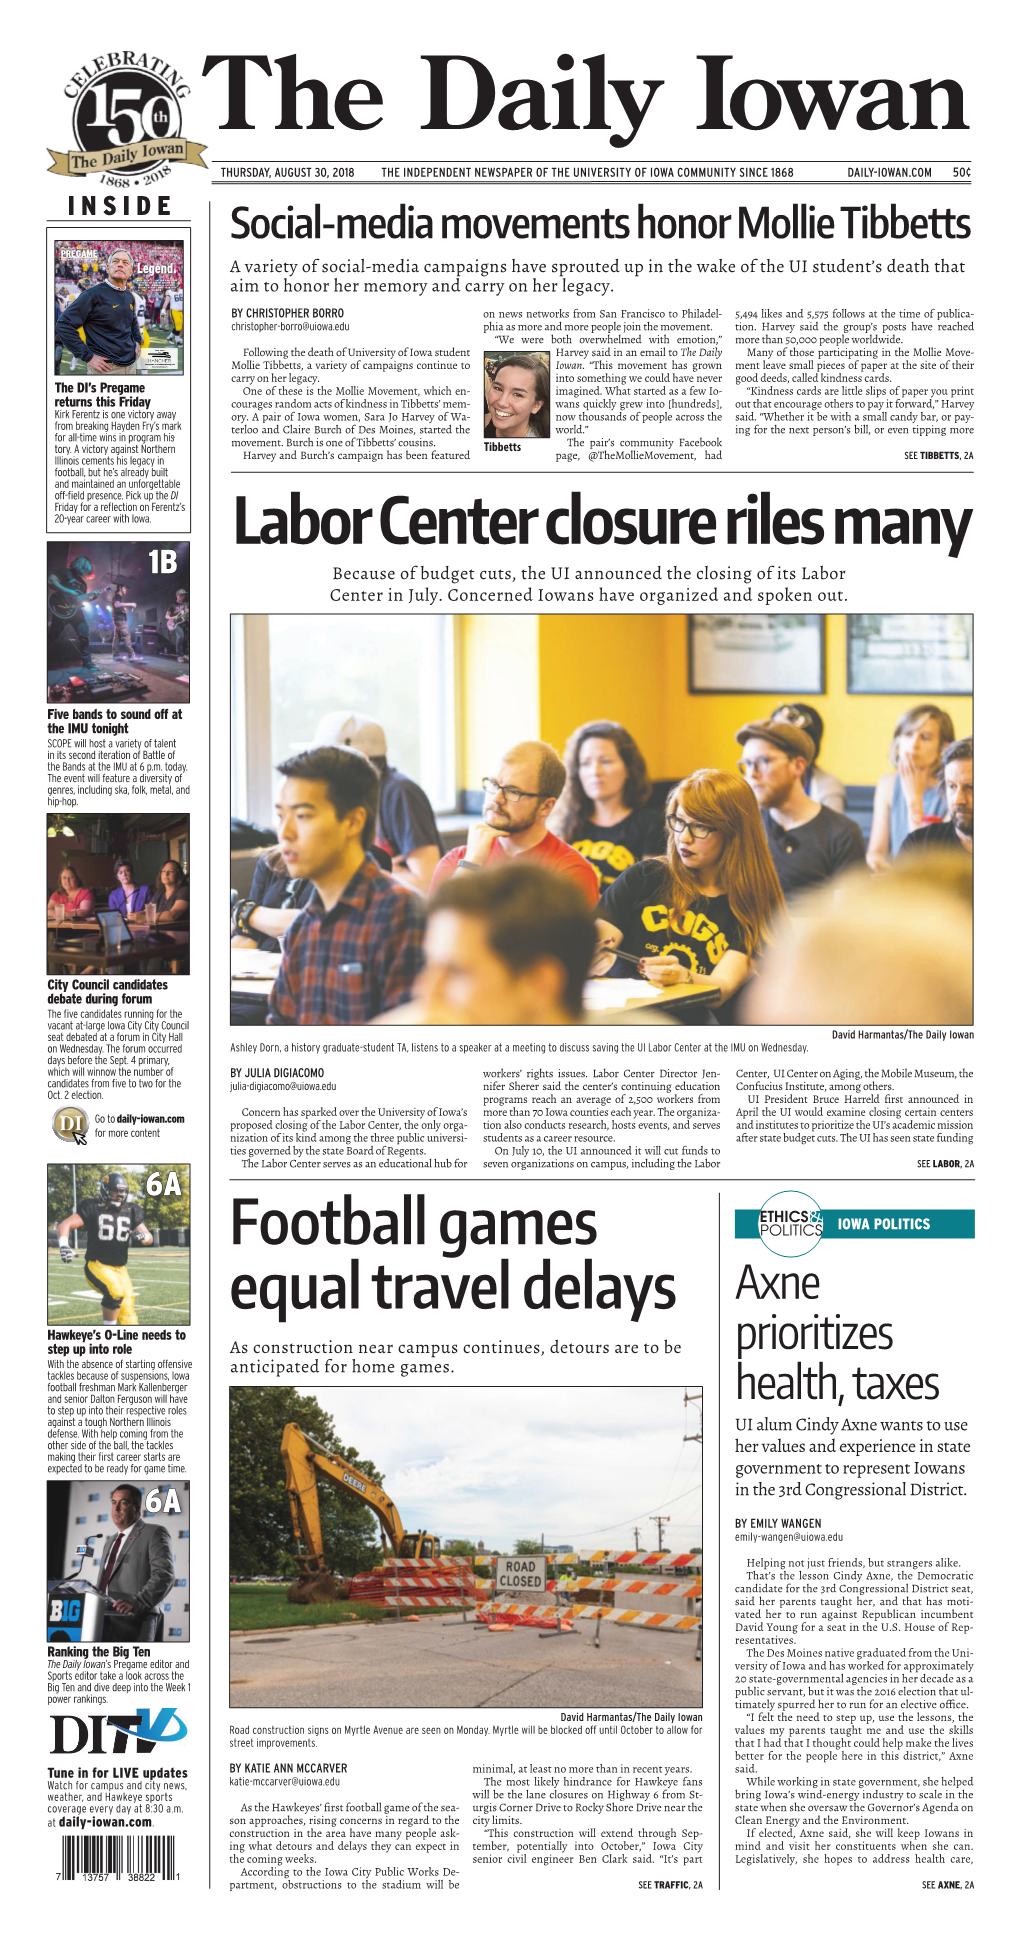 Labor Center Closure Riles Many 1B Because of Budget Cuts, the UI Announced the Closing of Its Labor Center in July